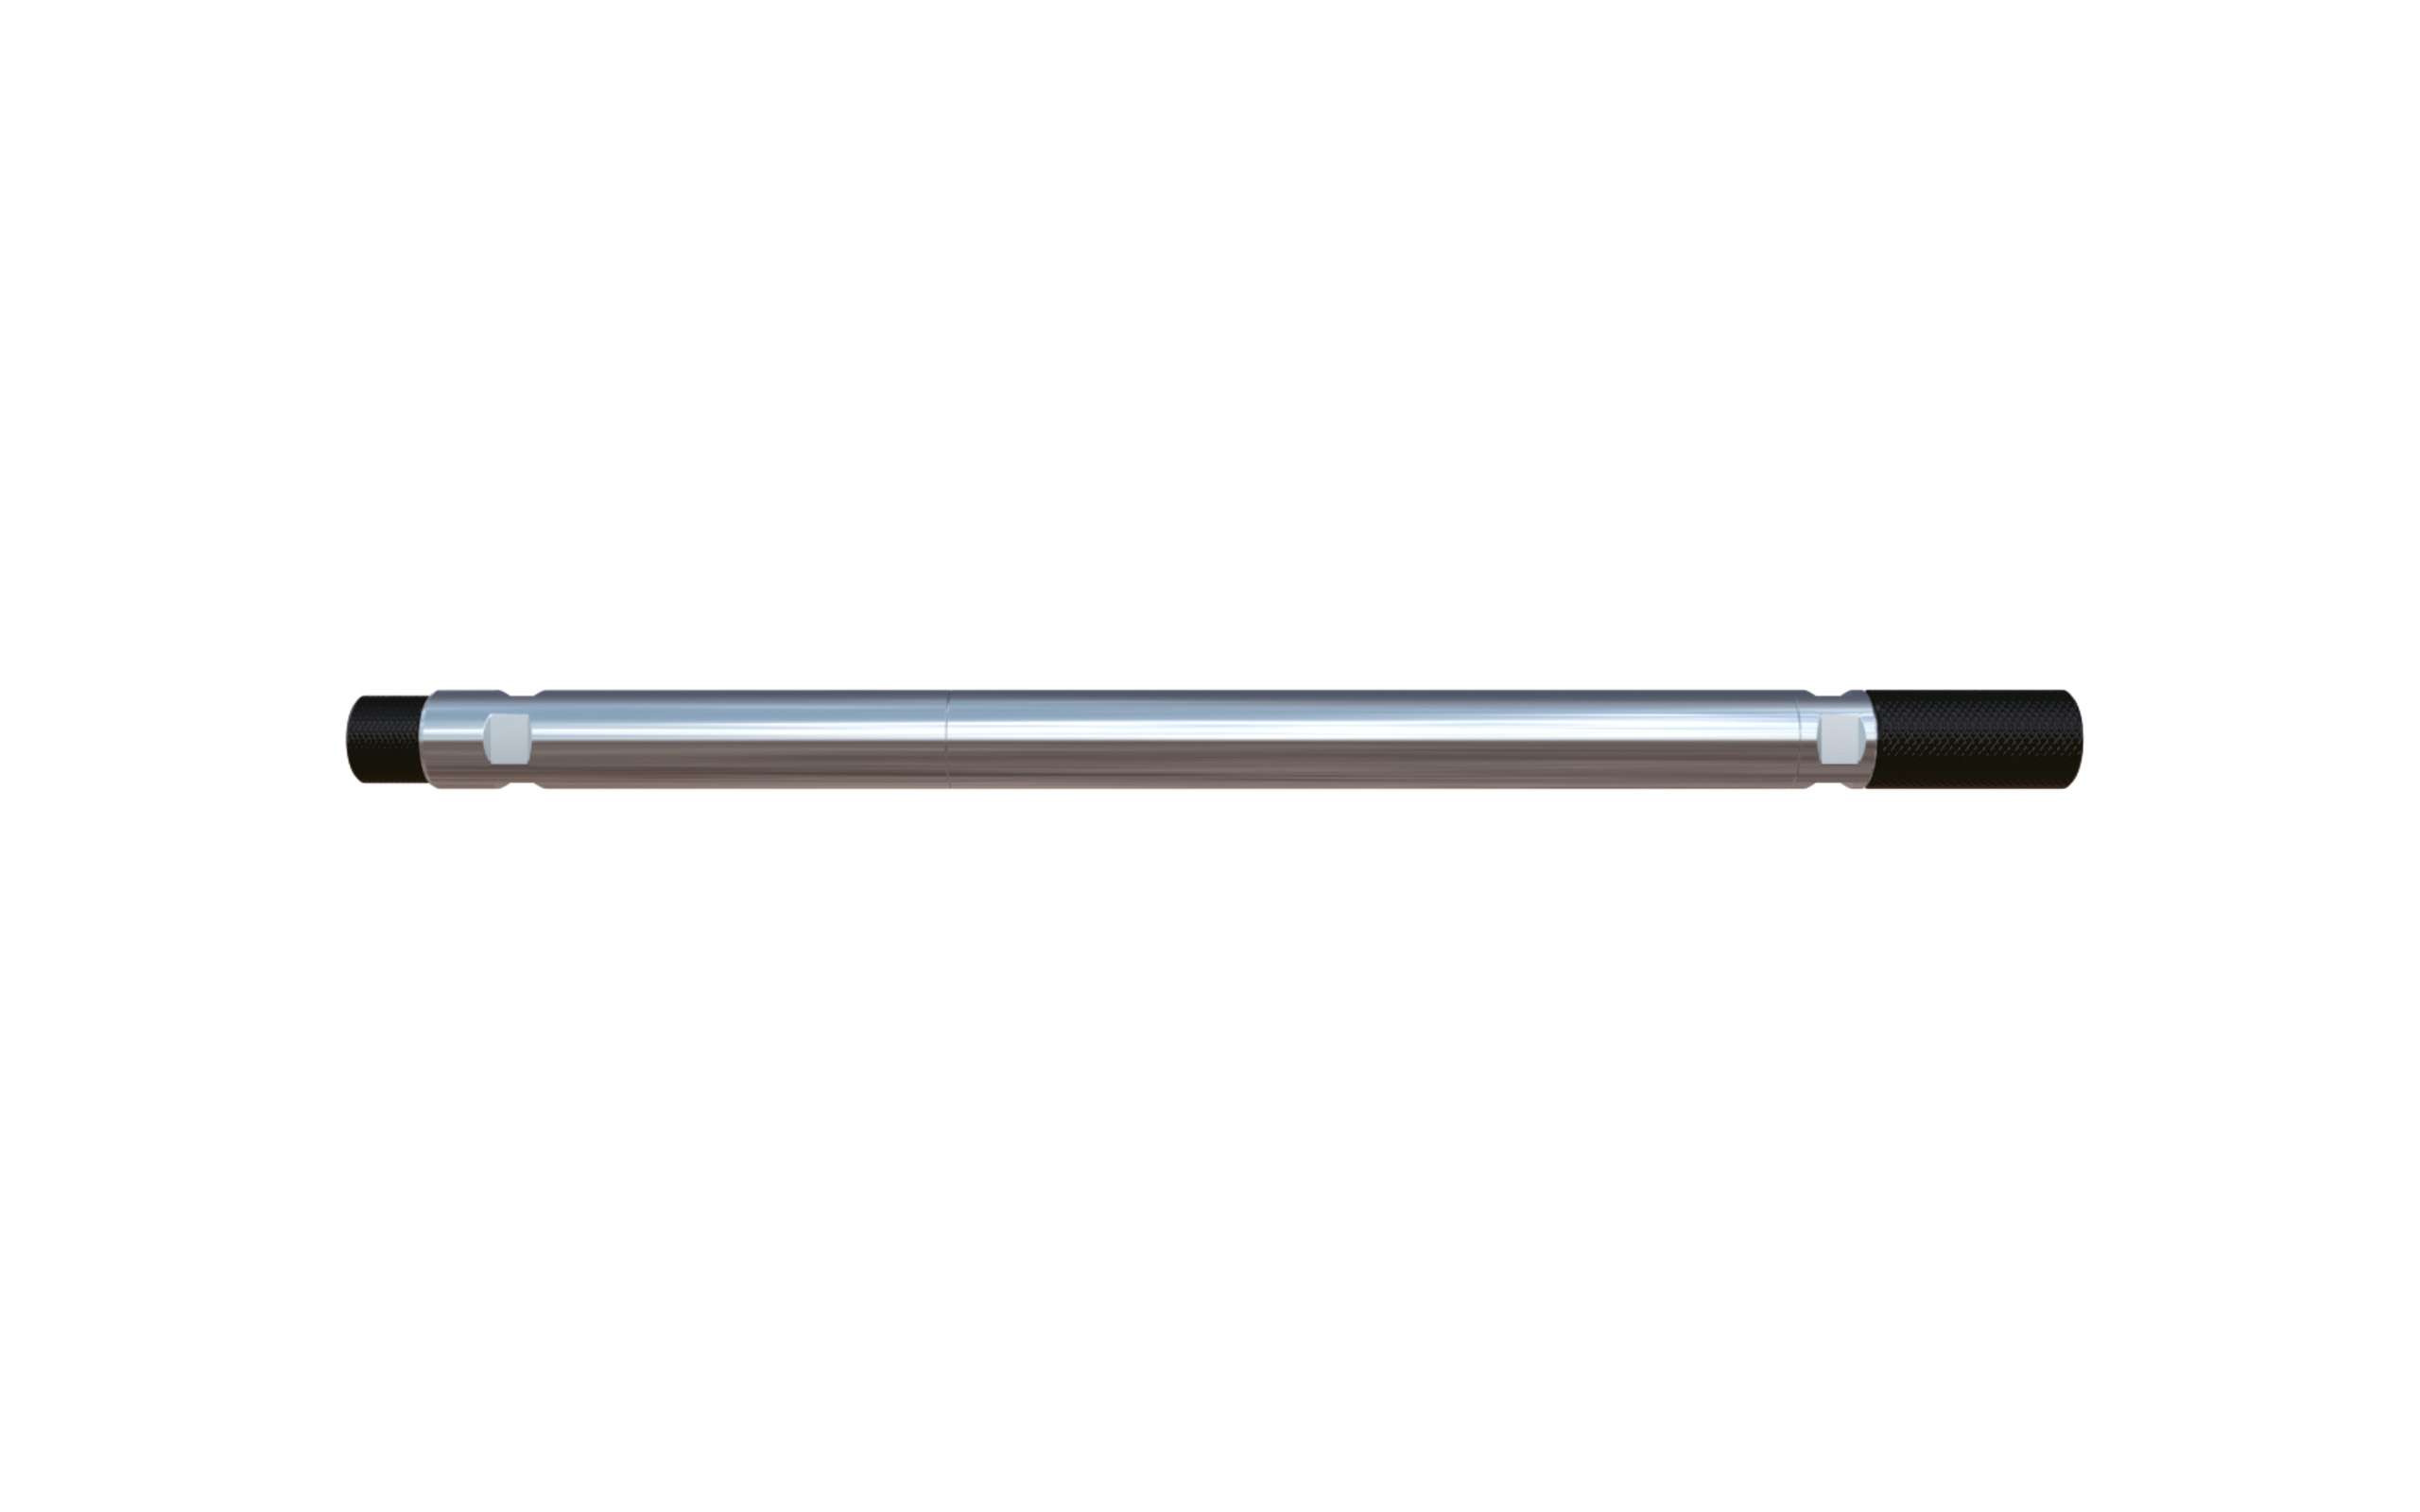 Gas Holdup Tool - long metal tube with black ends